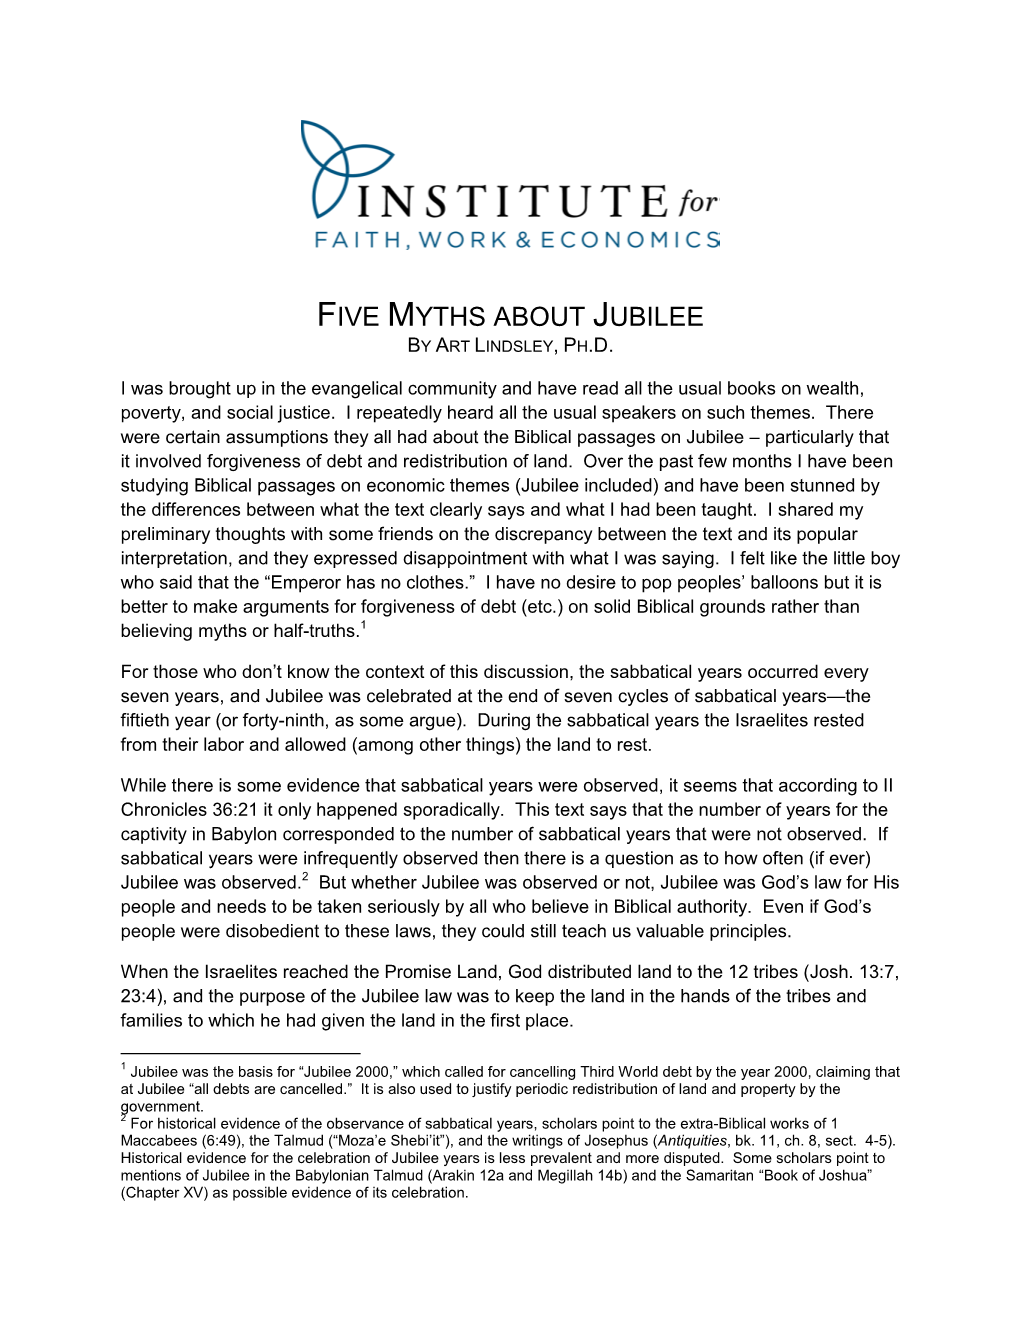 Five Myths About Jubilee by Art Lindsley, Ph.D